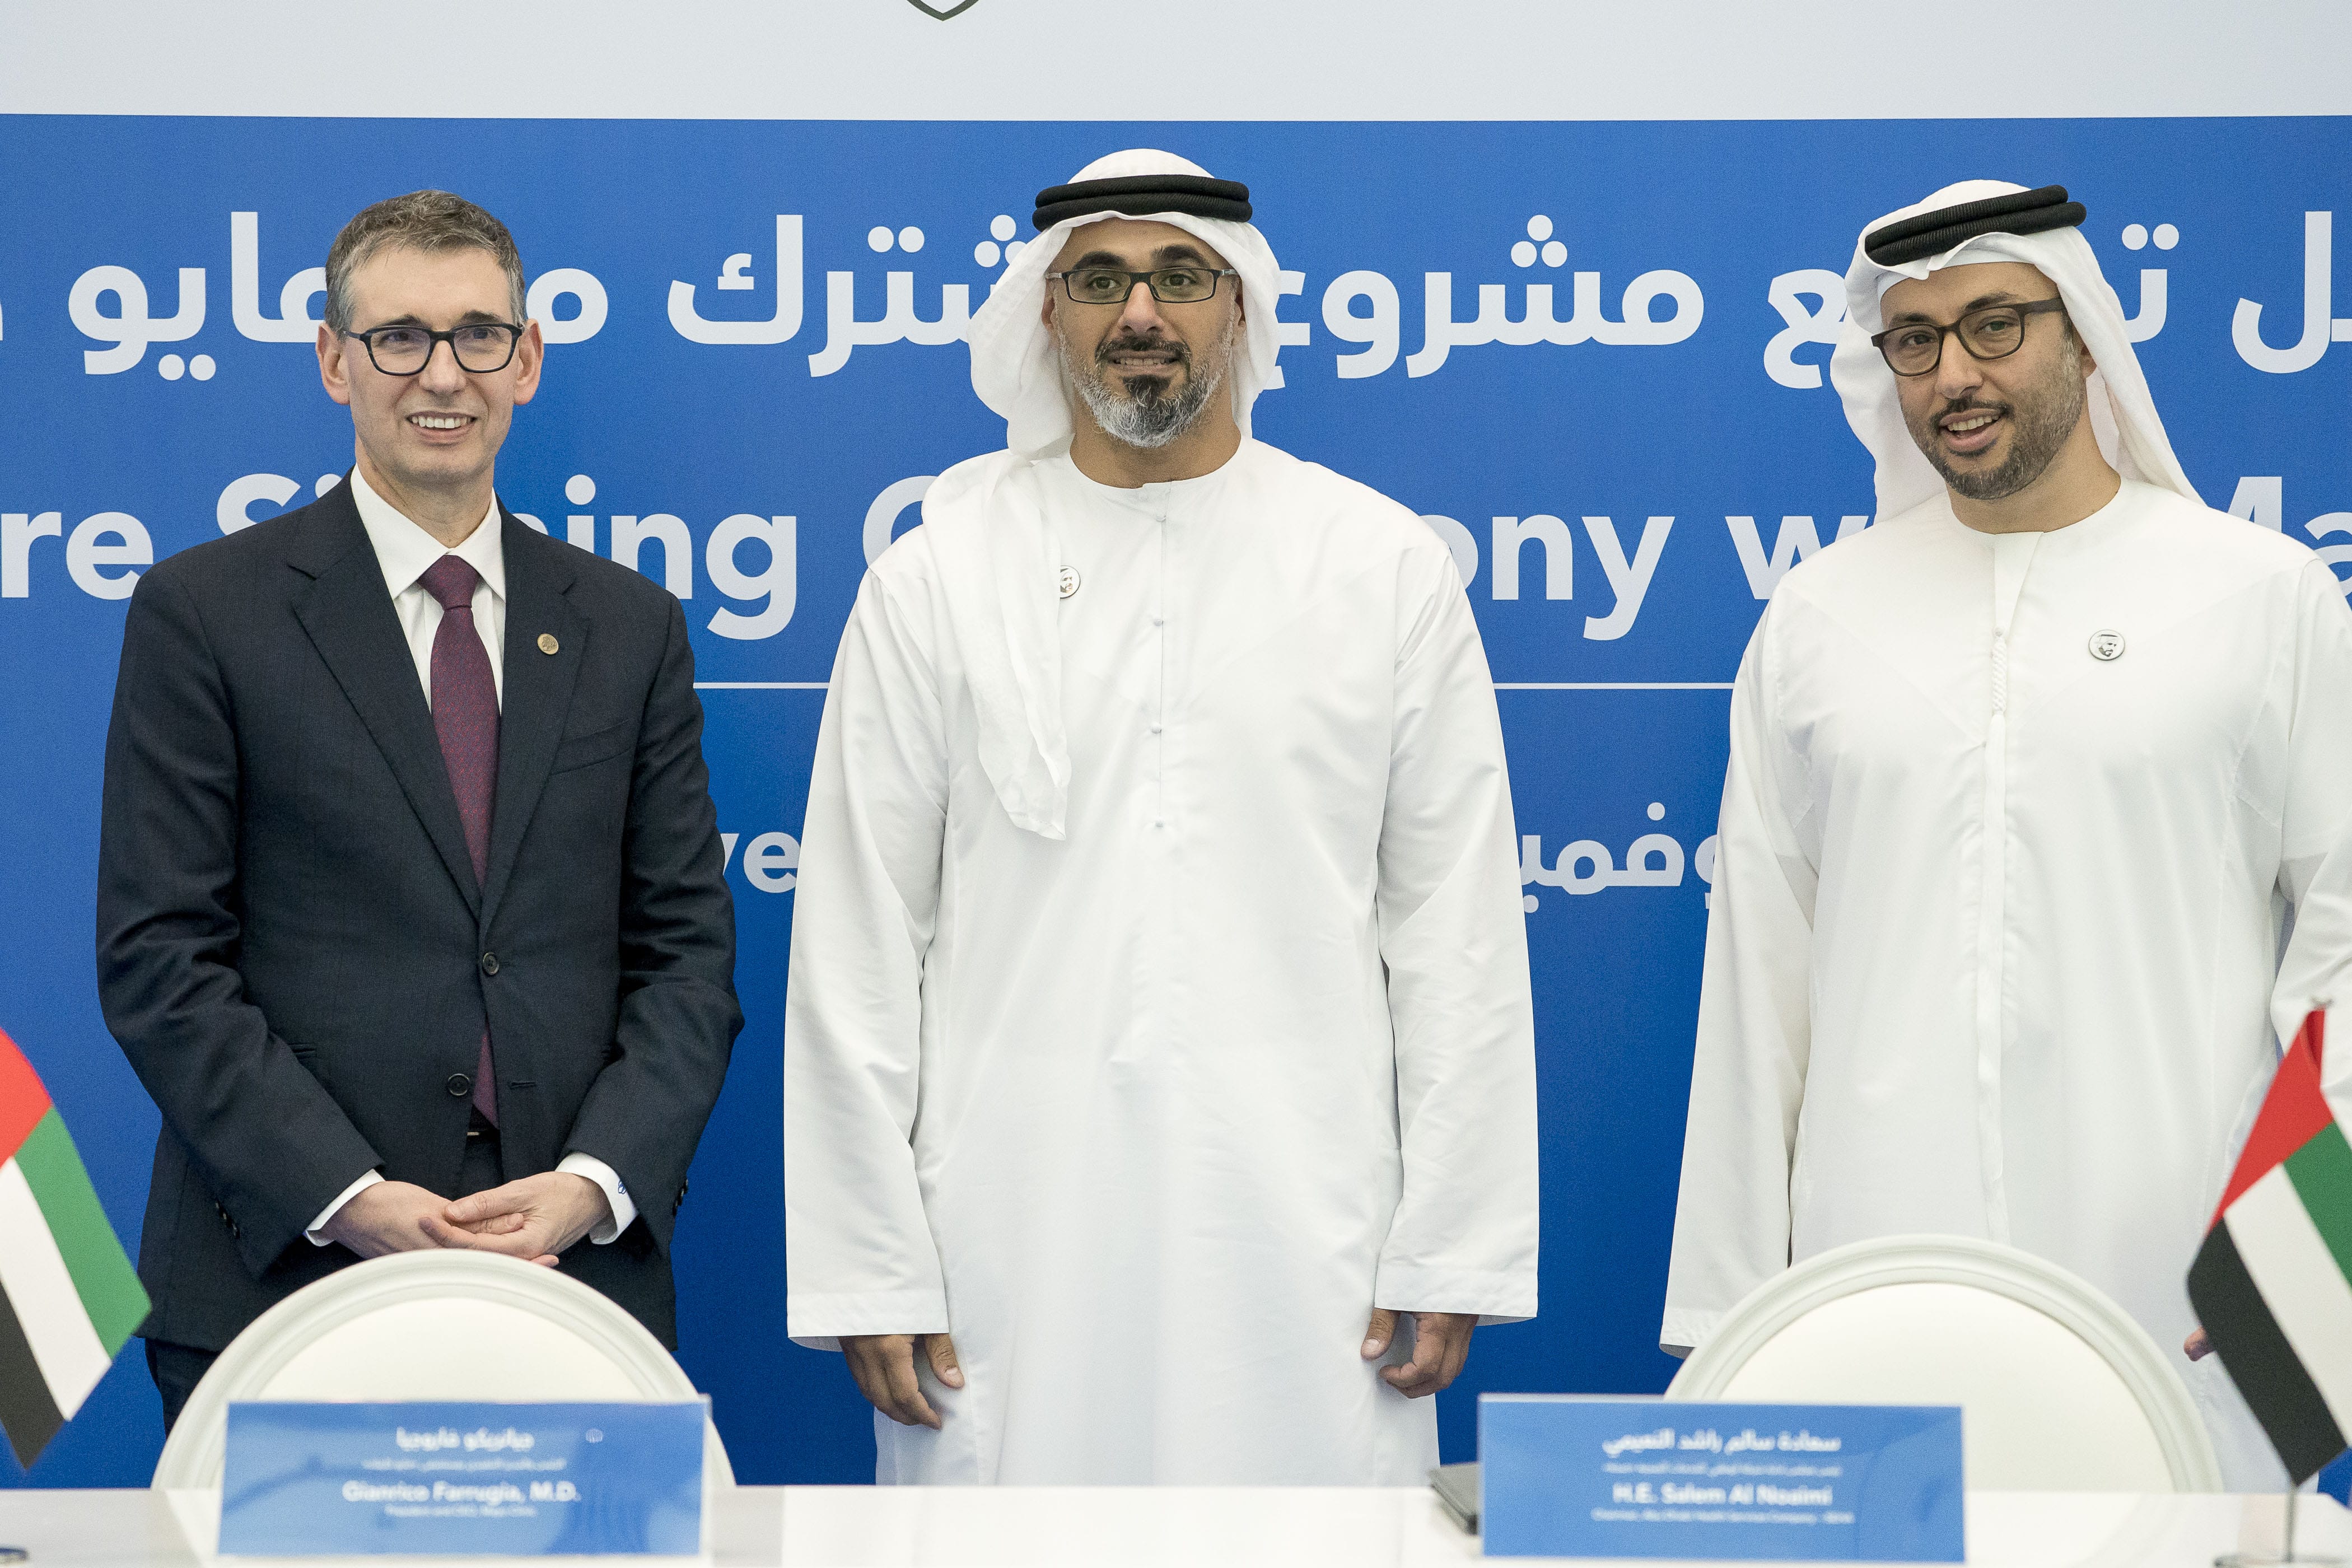 SEHA and Mayo Clinic enter joint venture to operate Sheikh Shakhbout Medical City